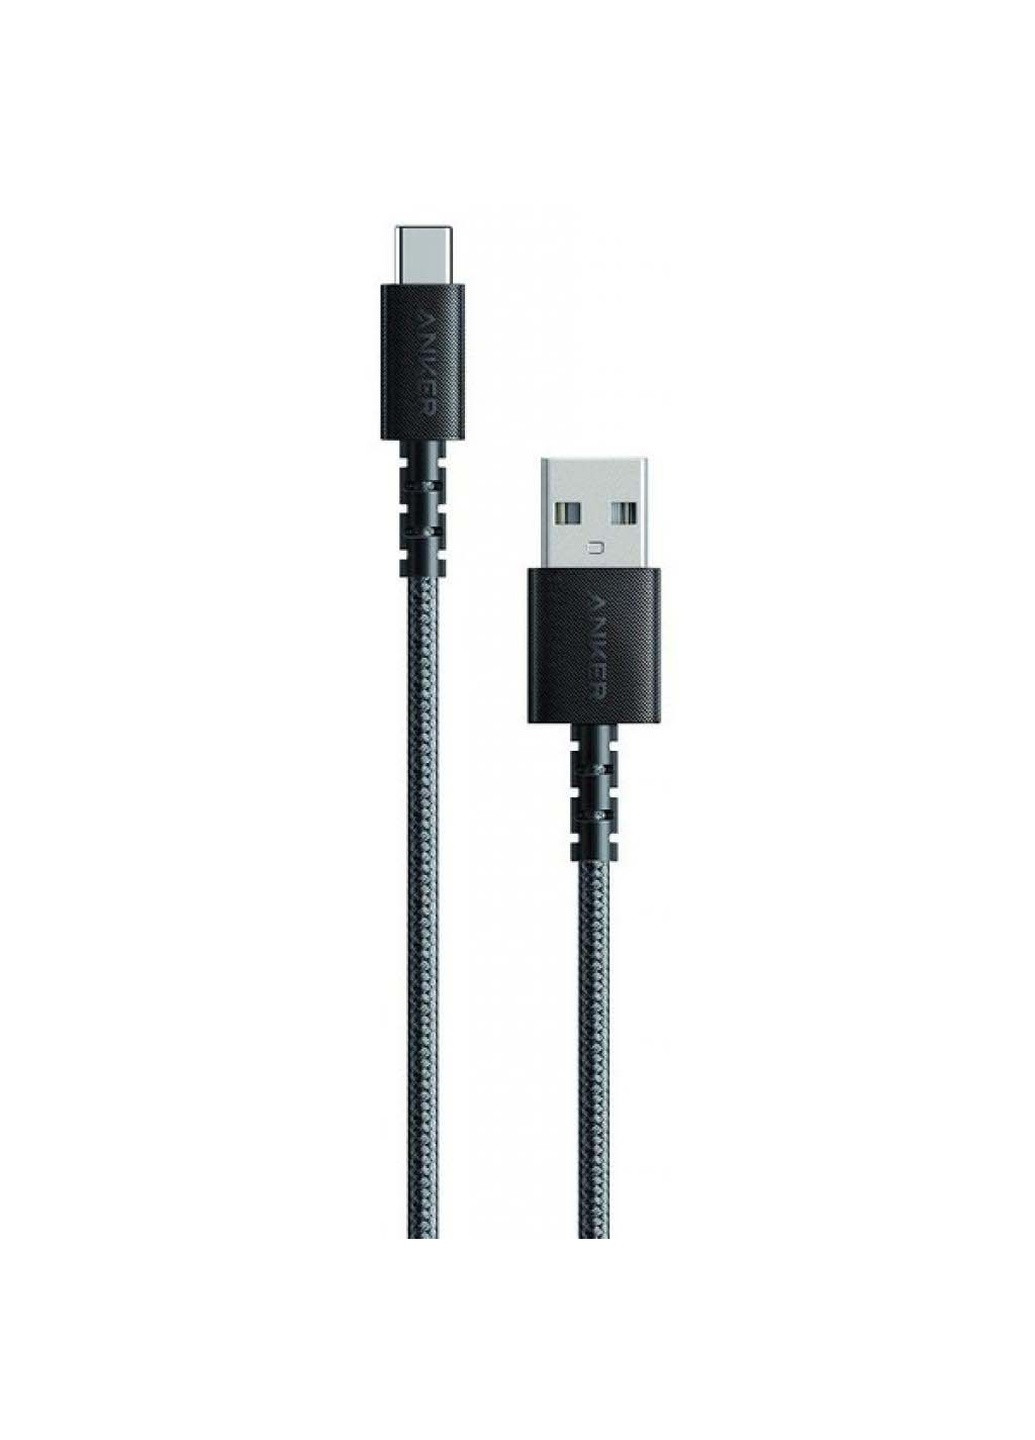 Дата кабель USB 2.0 AM to Type-C 0.9m Powerline Select + Black (A8022H11) Anker usb 2.0 am to type-c 0.9m powerline select+ black (239382782)